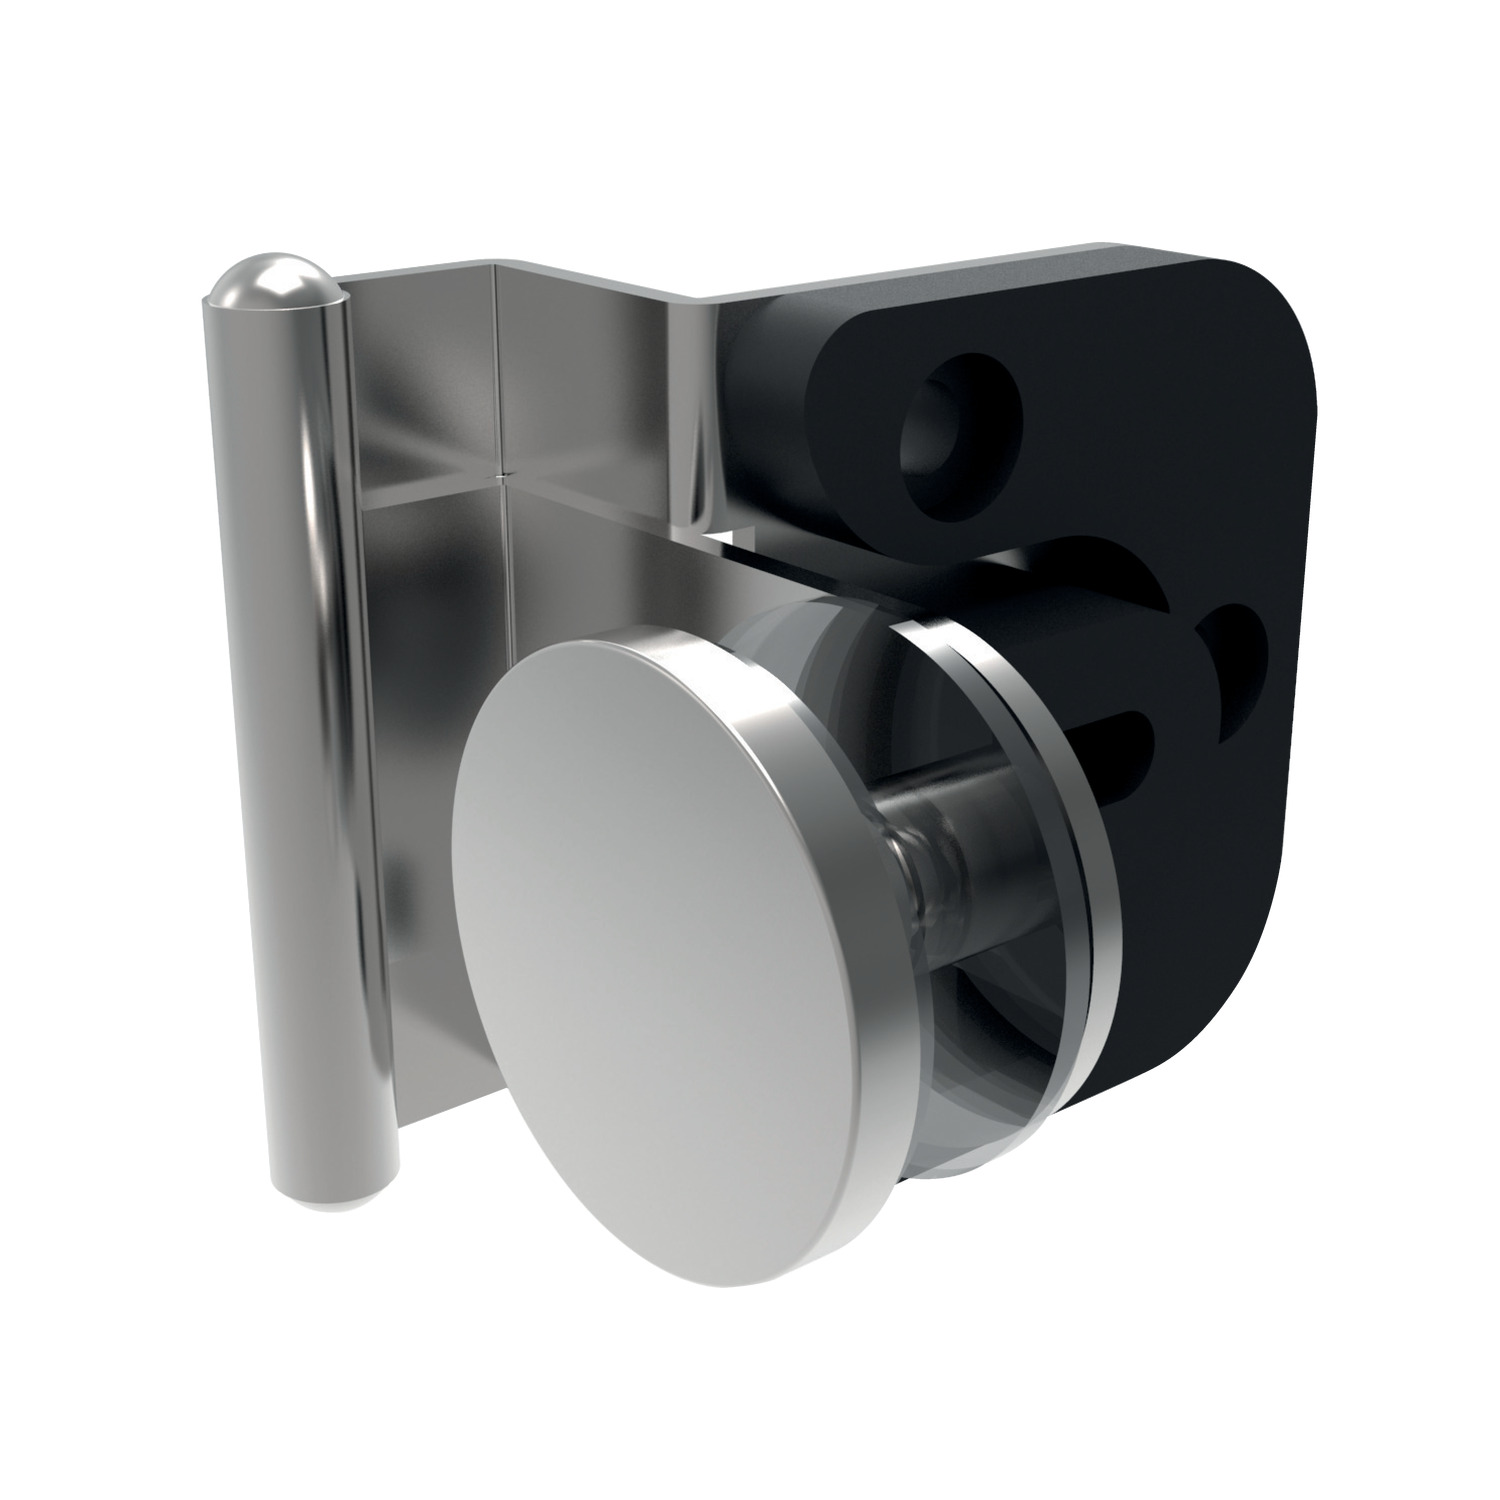 Glass Door Hinges - Half Overlay Type Available in steel or stainless steel with plastic overaly body. Half overaly design forms mechanical catch to hold door closed. Drilling is necessary for fitting. Suitable for 4 -6 mm door thickness and a door weight of 4kg.